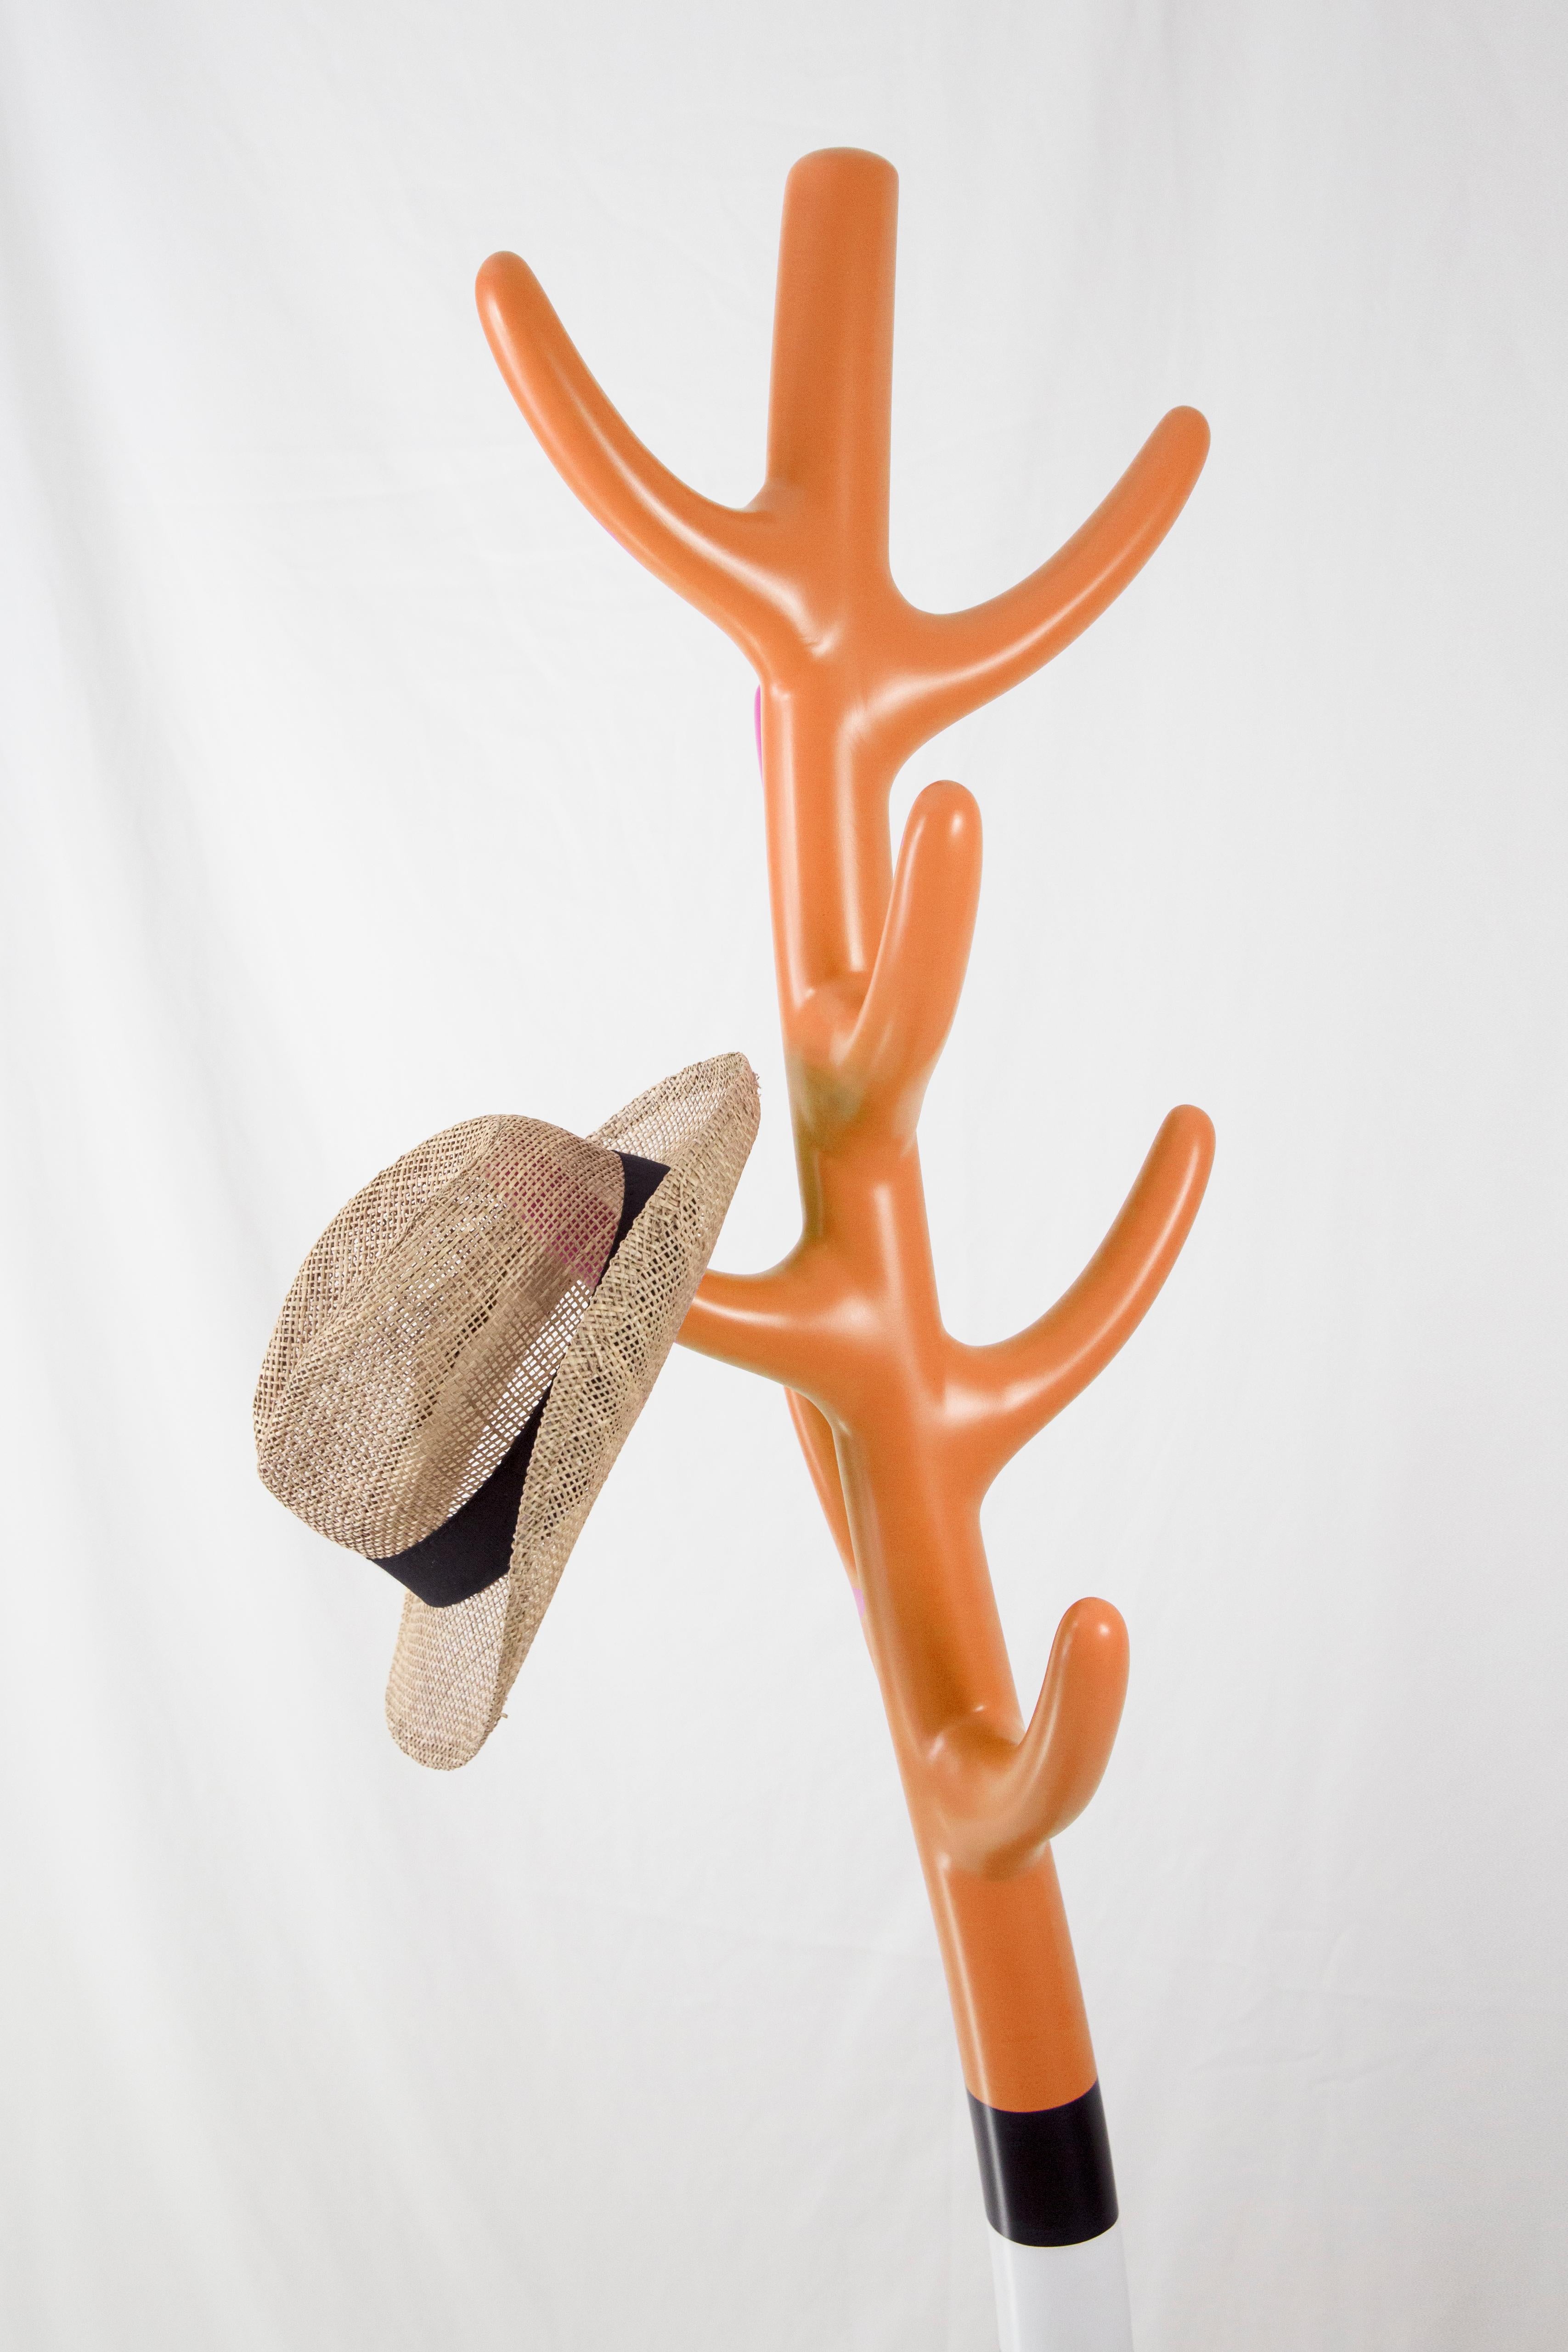 Overview:
Transform your entryway or living space with the Crooked Coat Rack, a sculptural piece that combines functionality with artistic flair. Crafted with an amorphous design, this vibrant orange coat rack doubles as a striking art object that